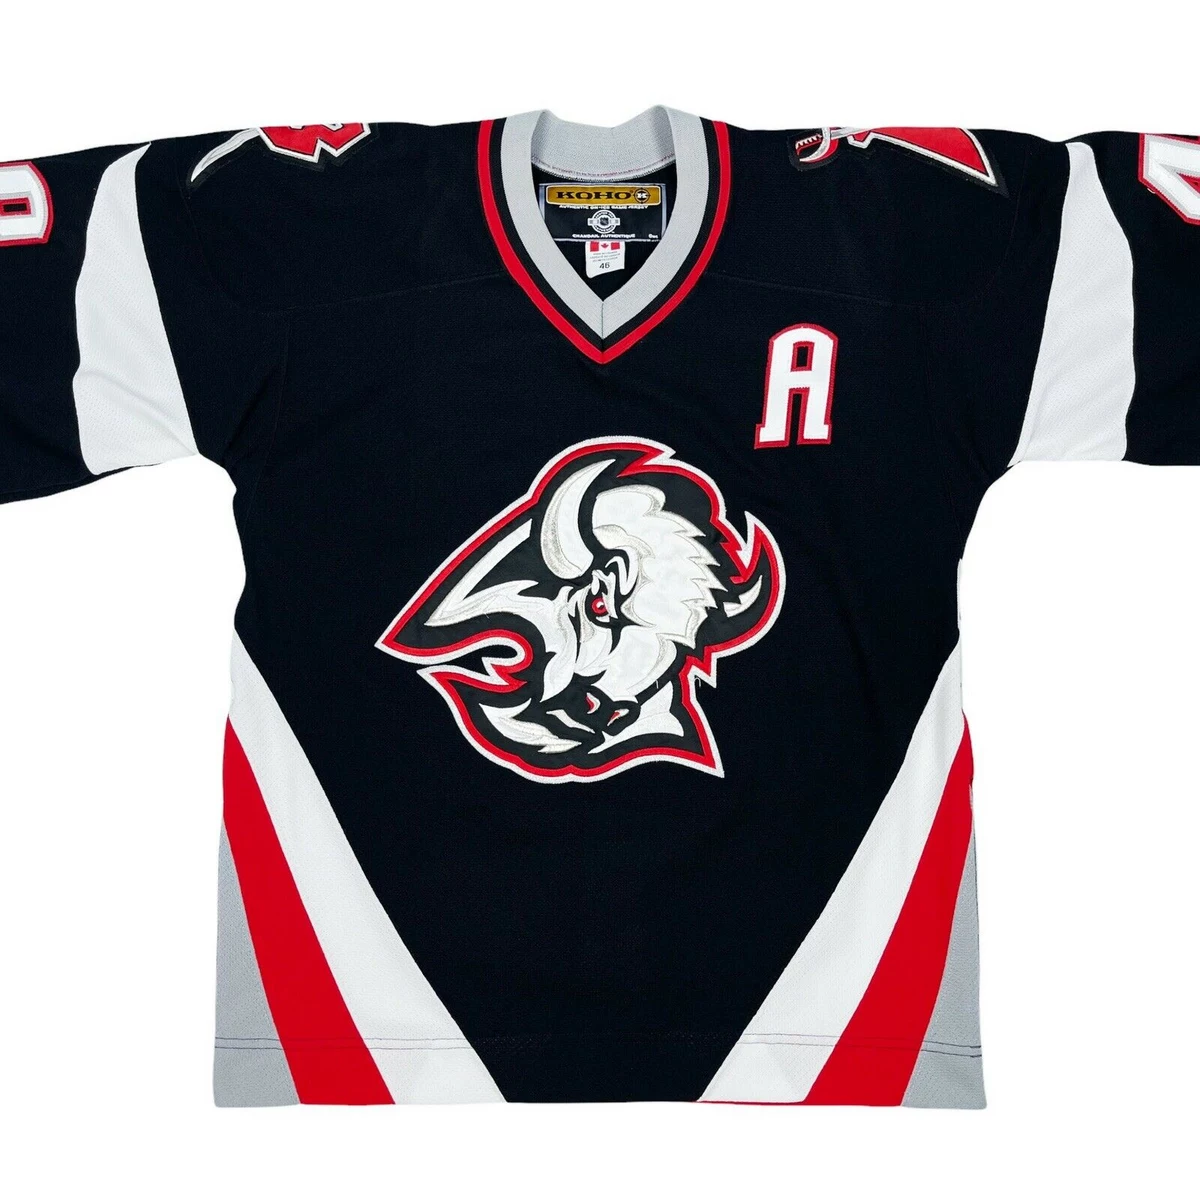 Best Buffalo Sabres Jerseys of All-Time? 